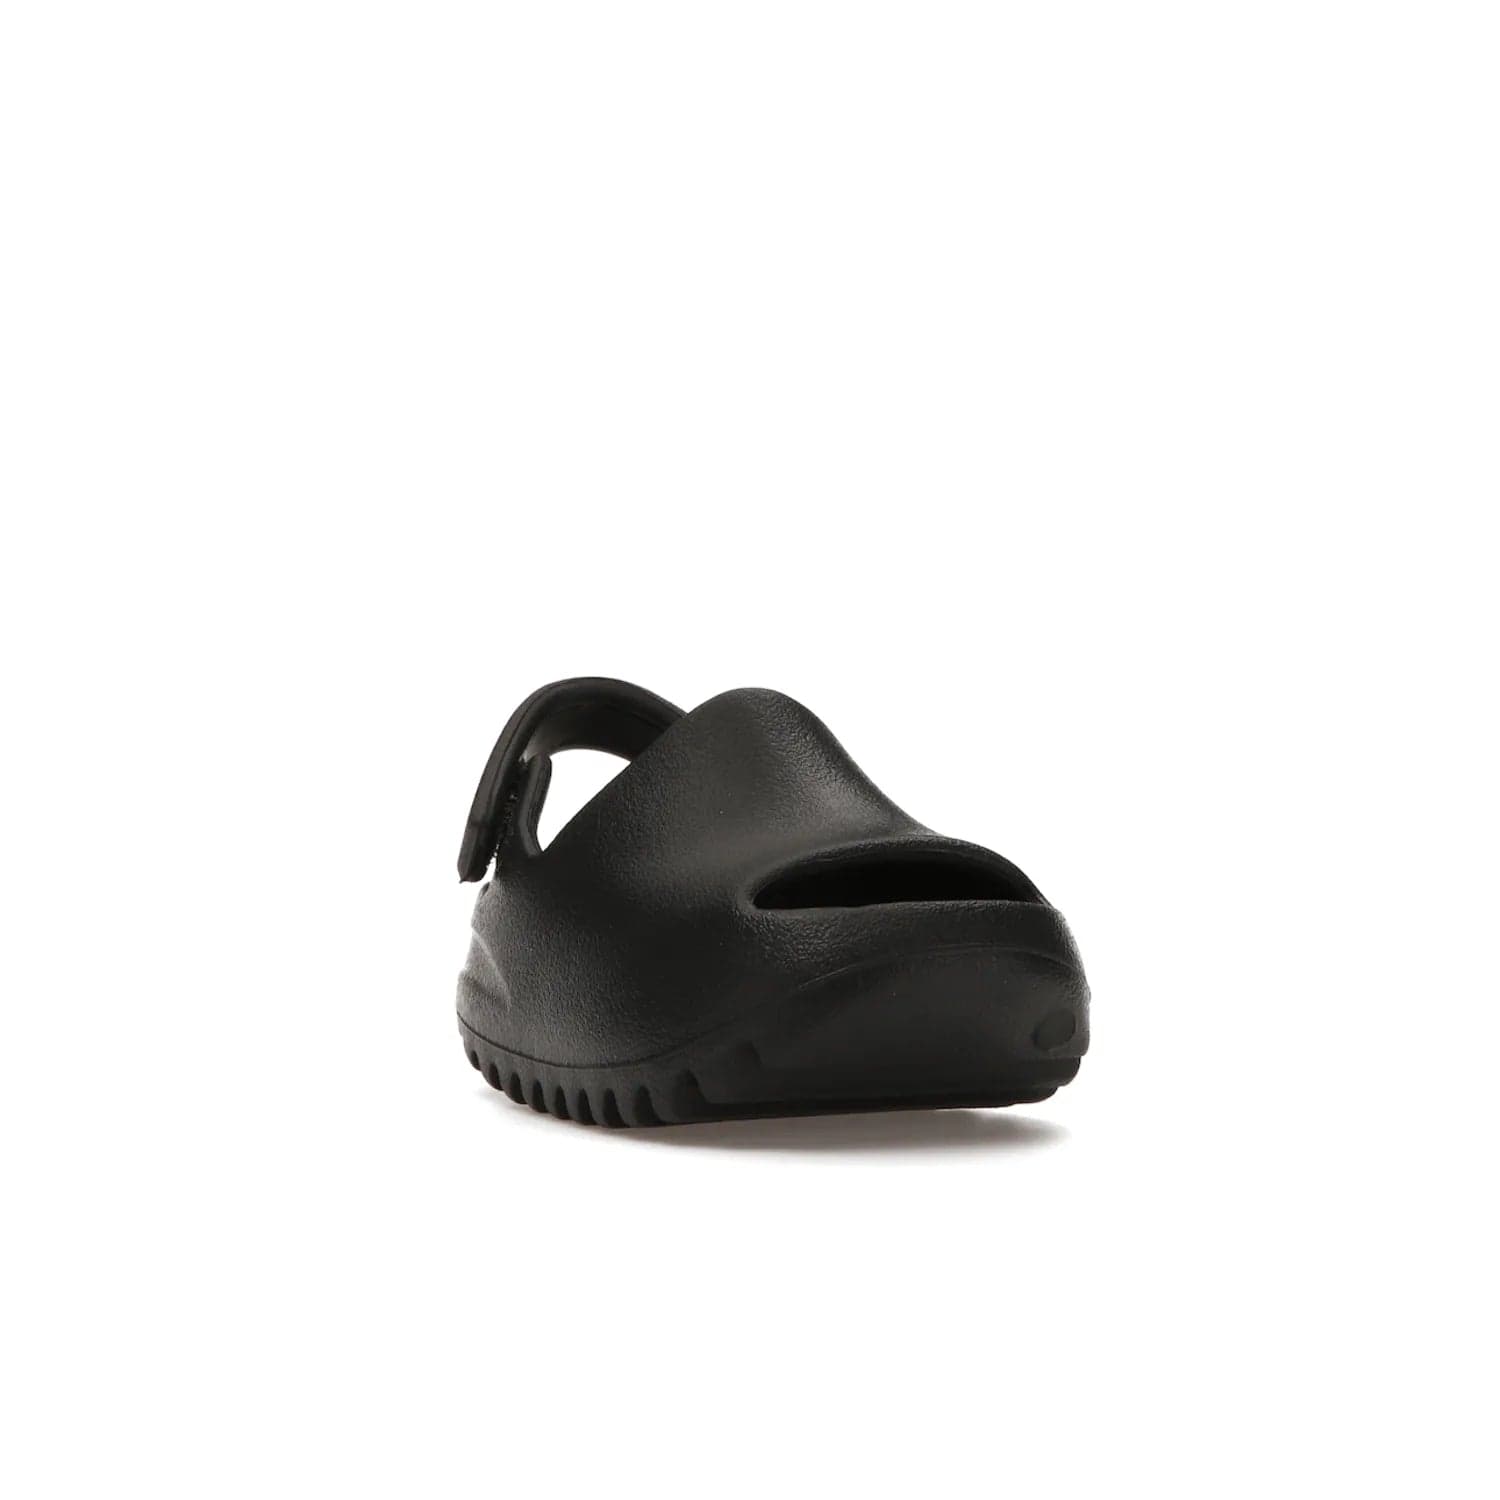 adidas Yeezy Slide Onyx (Infants) - Image 7 - Only at www.BallersClubKickz.com - The Adidas Yeezy Slide Onyx (Infant) is a classic silhouette with unique features and durable EVA foam. Released in May 2021 with a starting price of $70, it's no wonder it quickly gained popularity with its cool, minimalist look.